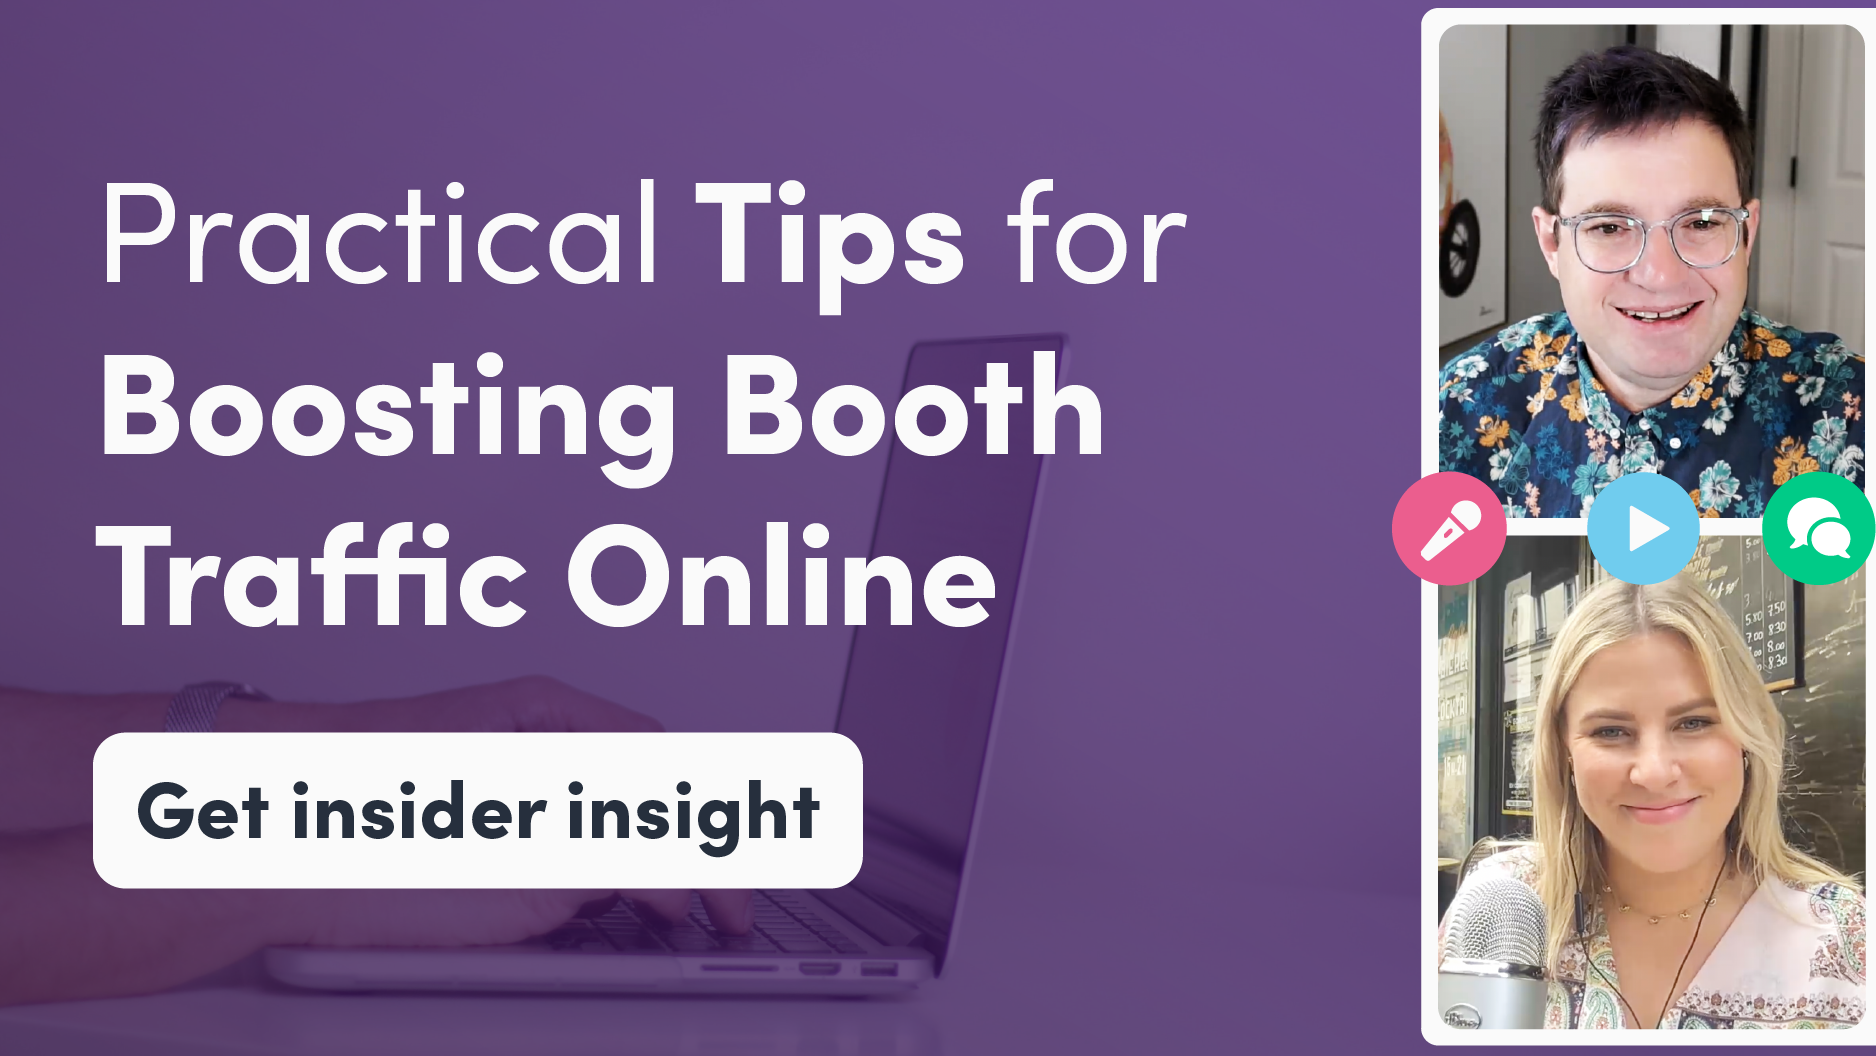 Practical Tips for Boosting Exhibitor Booth Traffic Online